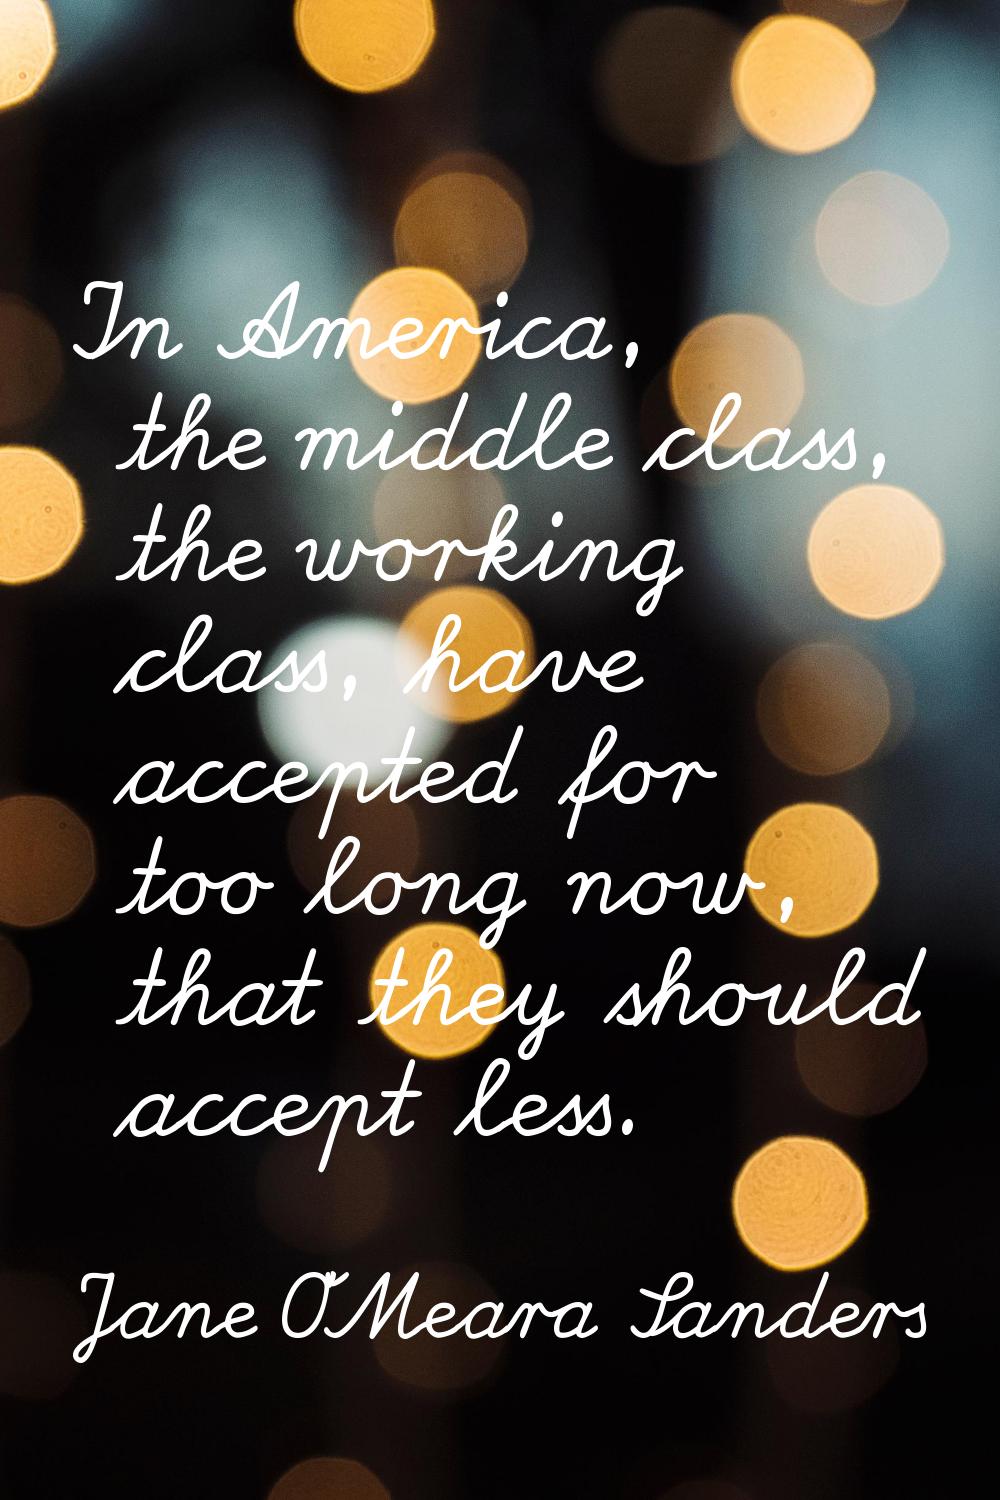 In America, the middle class, the working class, have accepted for too long now, that they should a